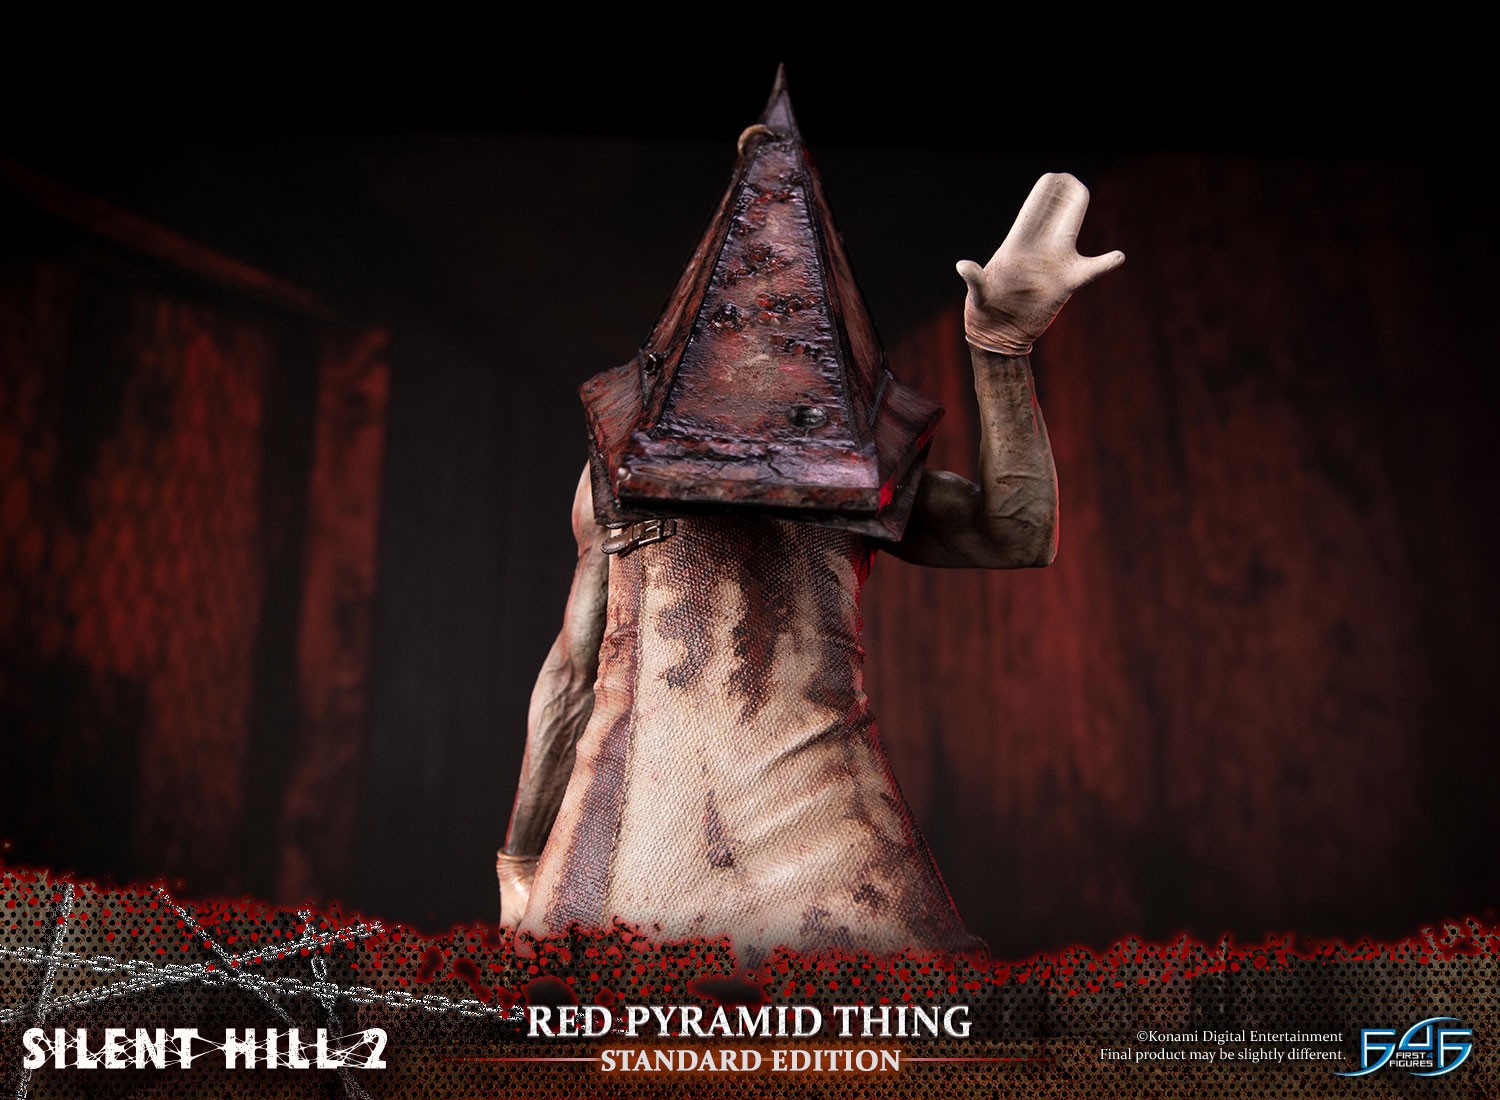 What's under the pyramid? : r/silenthill